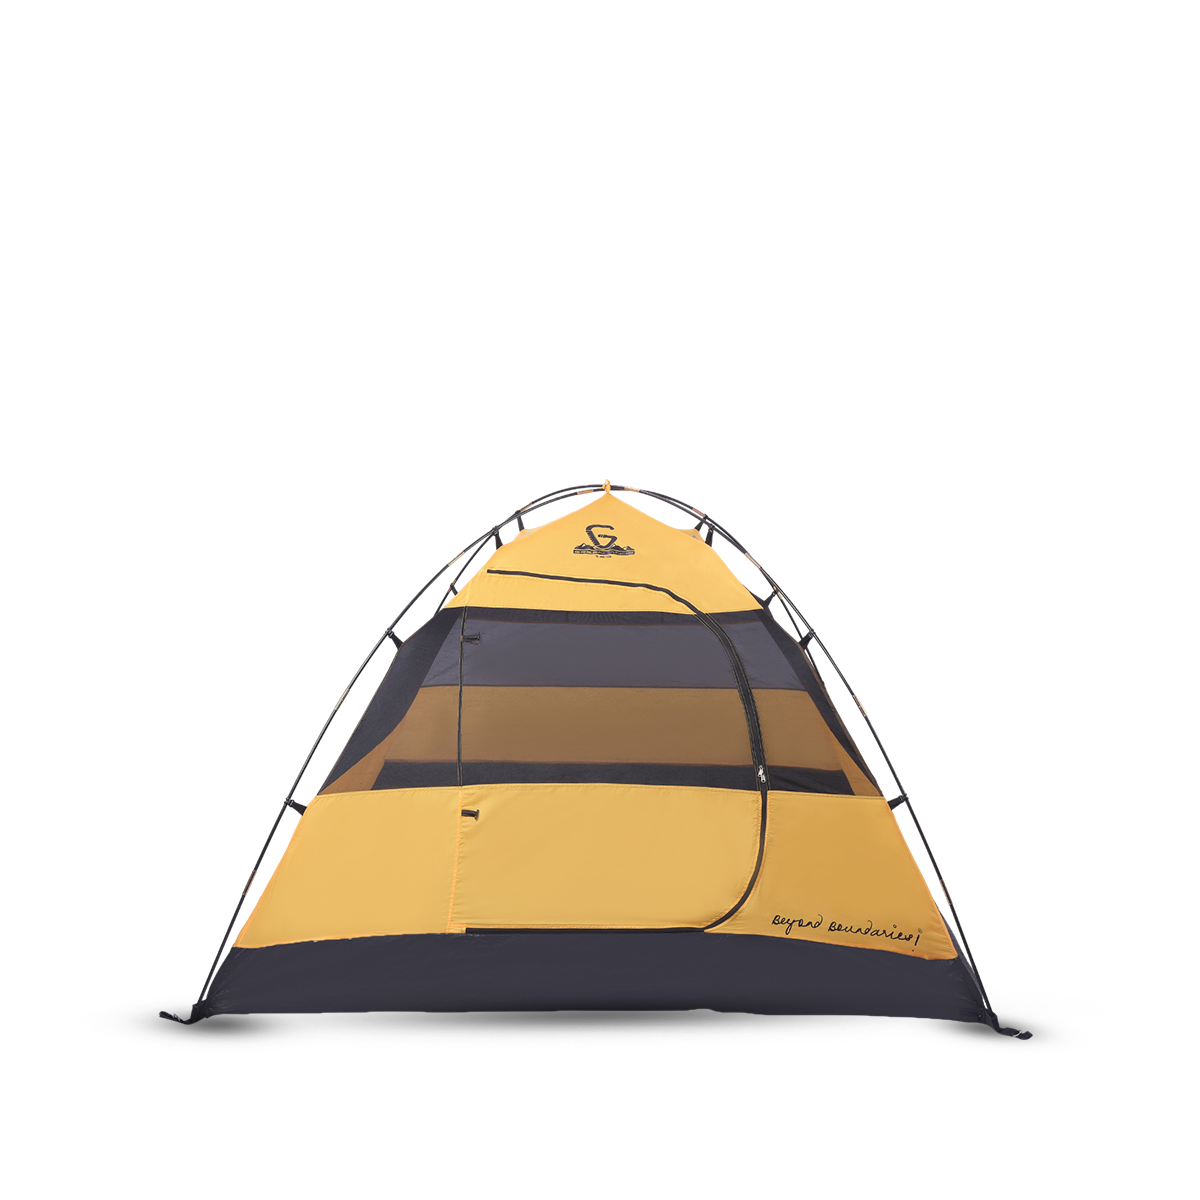 DUO 2P Camping Tent for Intimate Outdoor Escapes